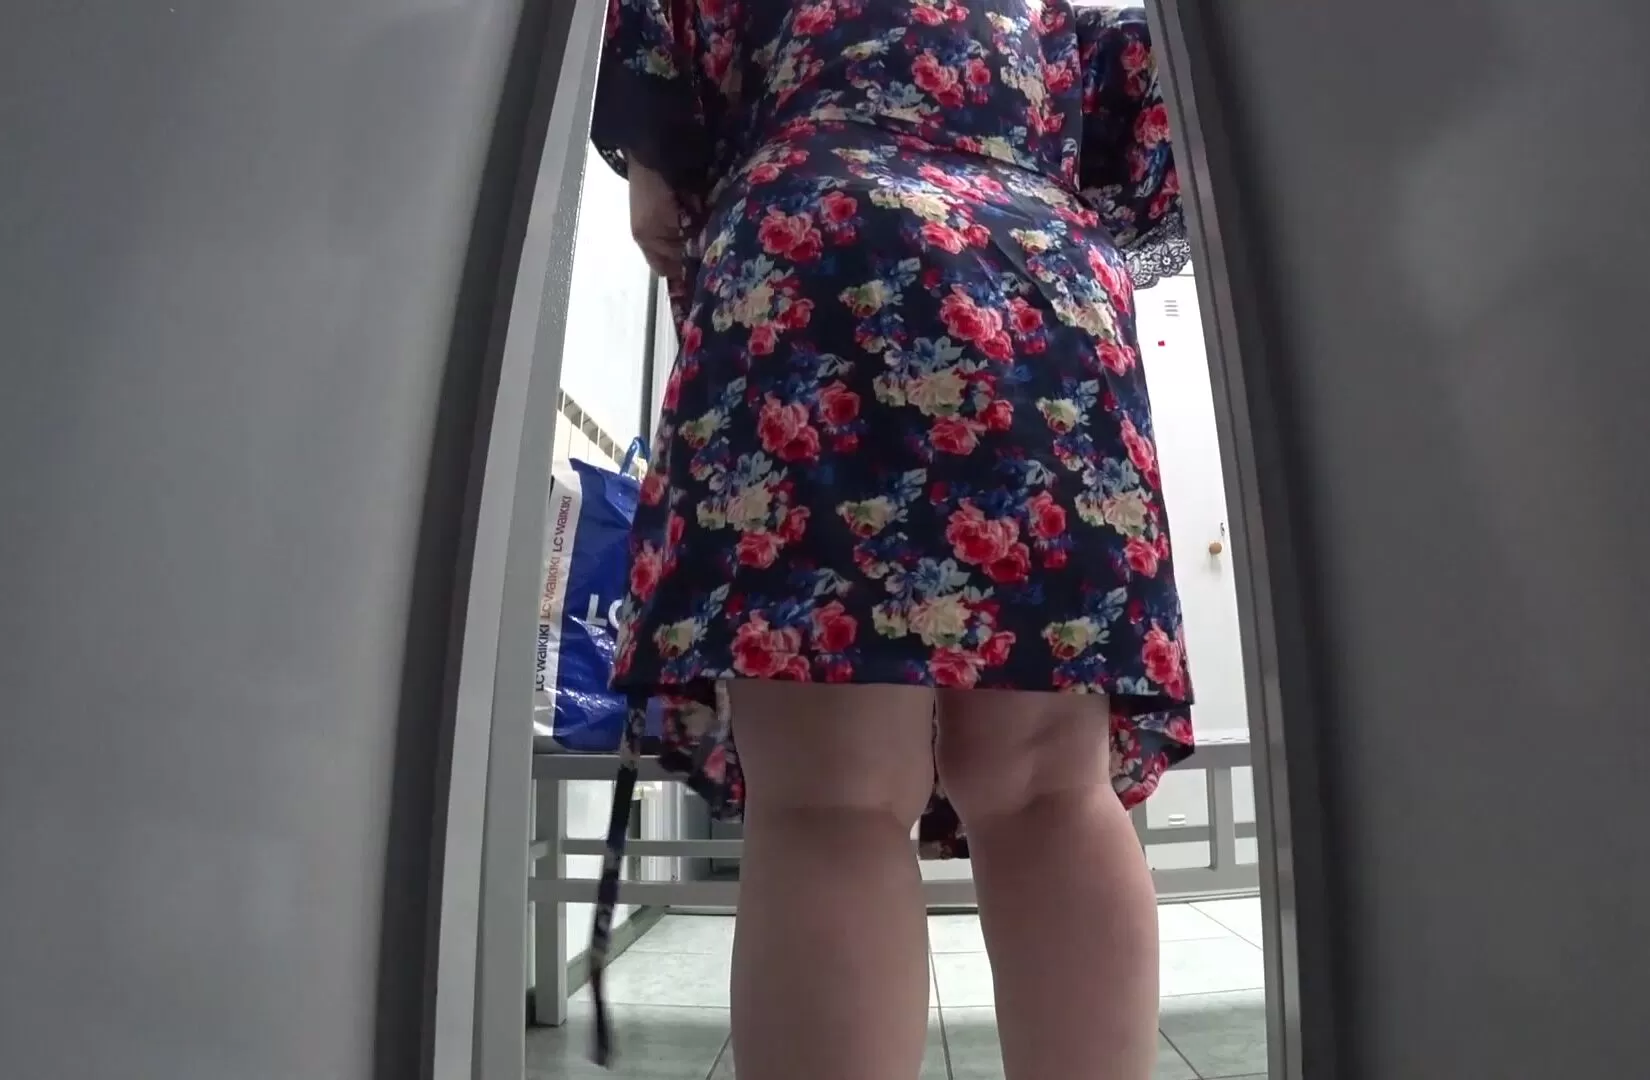 Hidden cam in the public locker room at the pool spying on a mature milf with a juicy ass, big boobs, hairy pussy and a plump belly. Amateur fetish pic photo